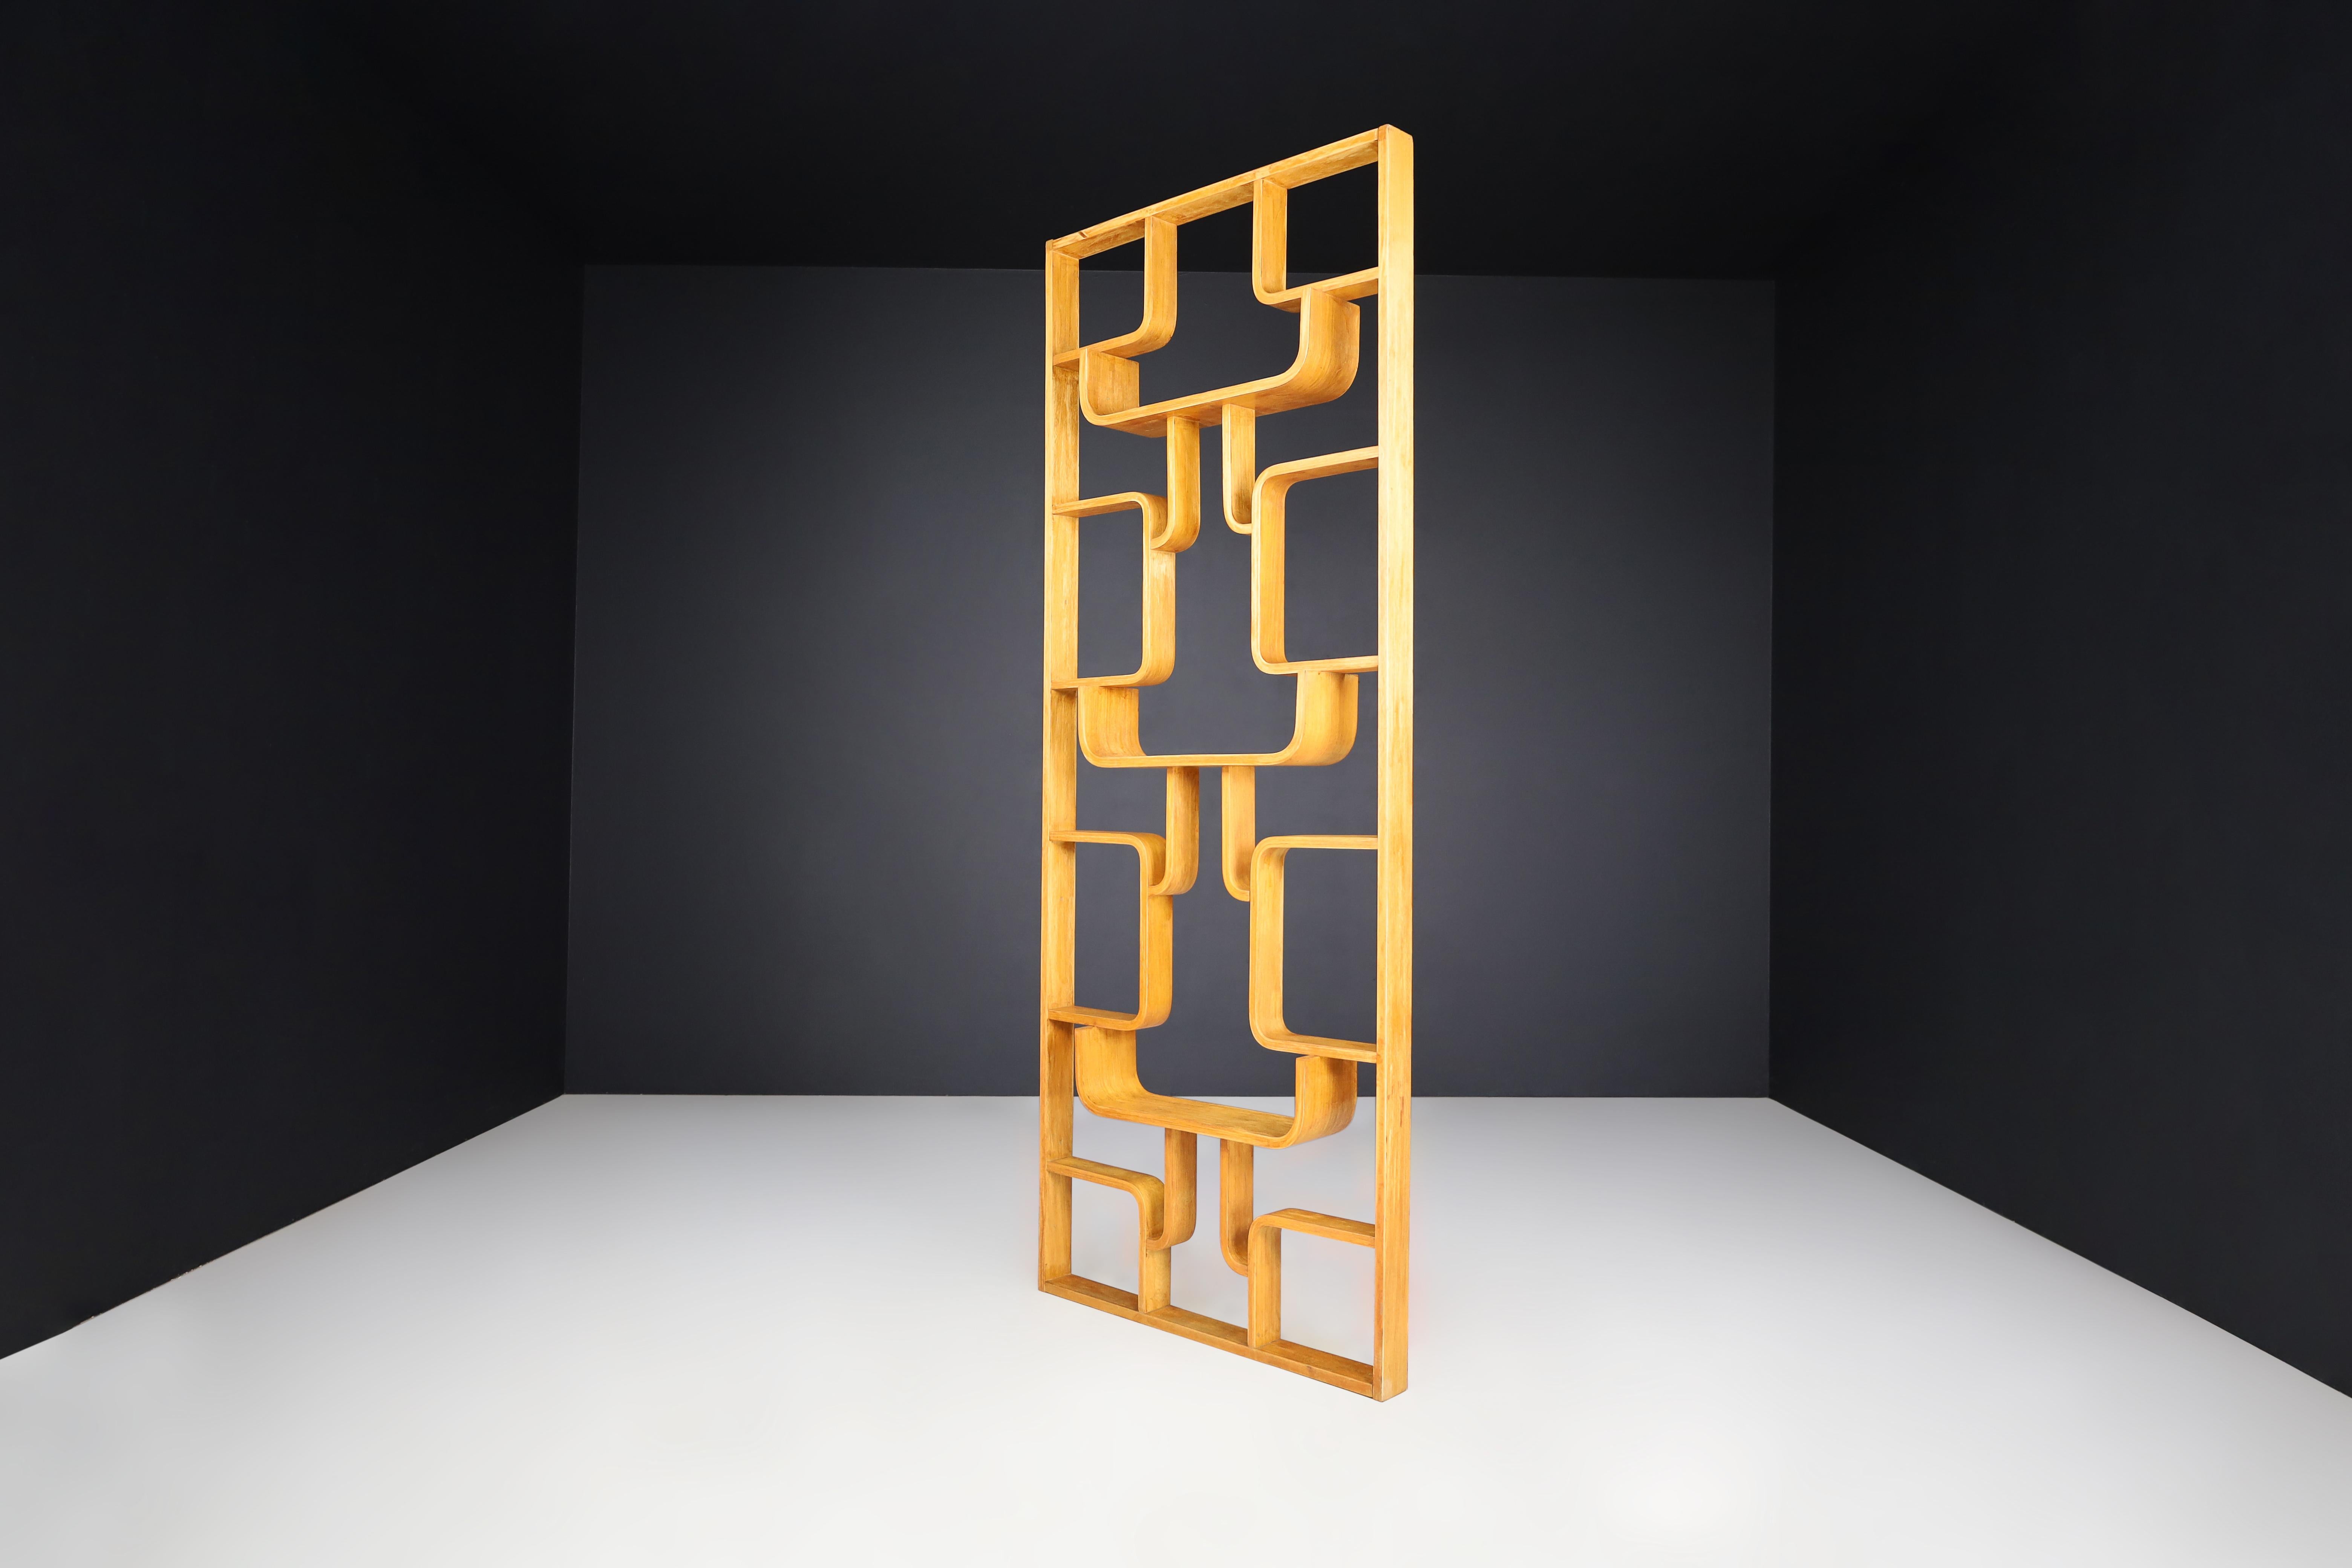 Midcentury Room Divider by Ludvik Volak for Drevopodnik Holesov, 1960s

This midcentury room divider is made of Bent-Wood by Ludvik Volak and was manufactured in Czechoslovakia by Drevopodnik Holesov in the 1960s. It was bought from the original